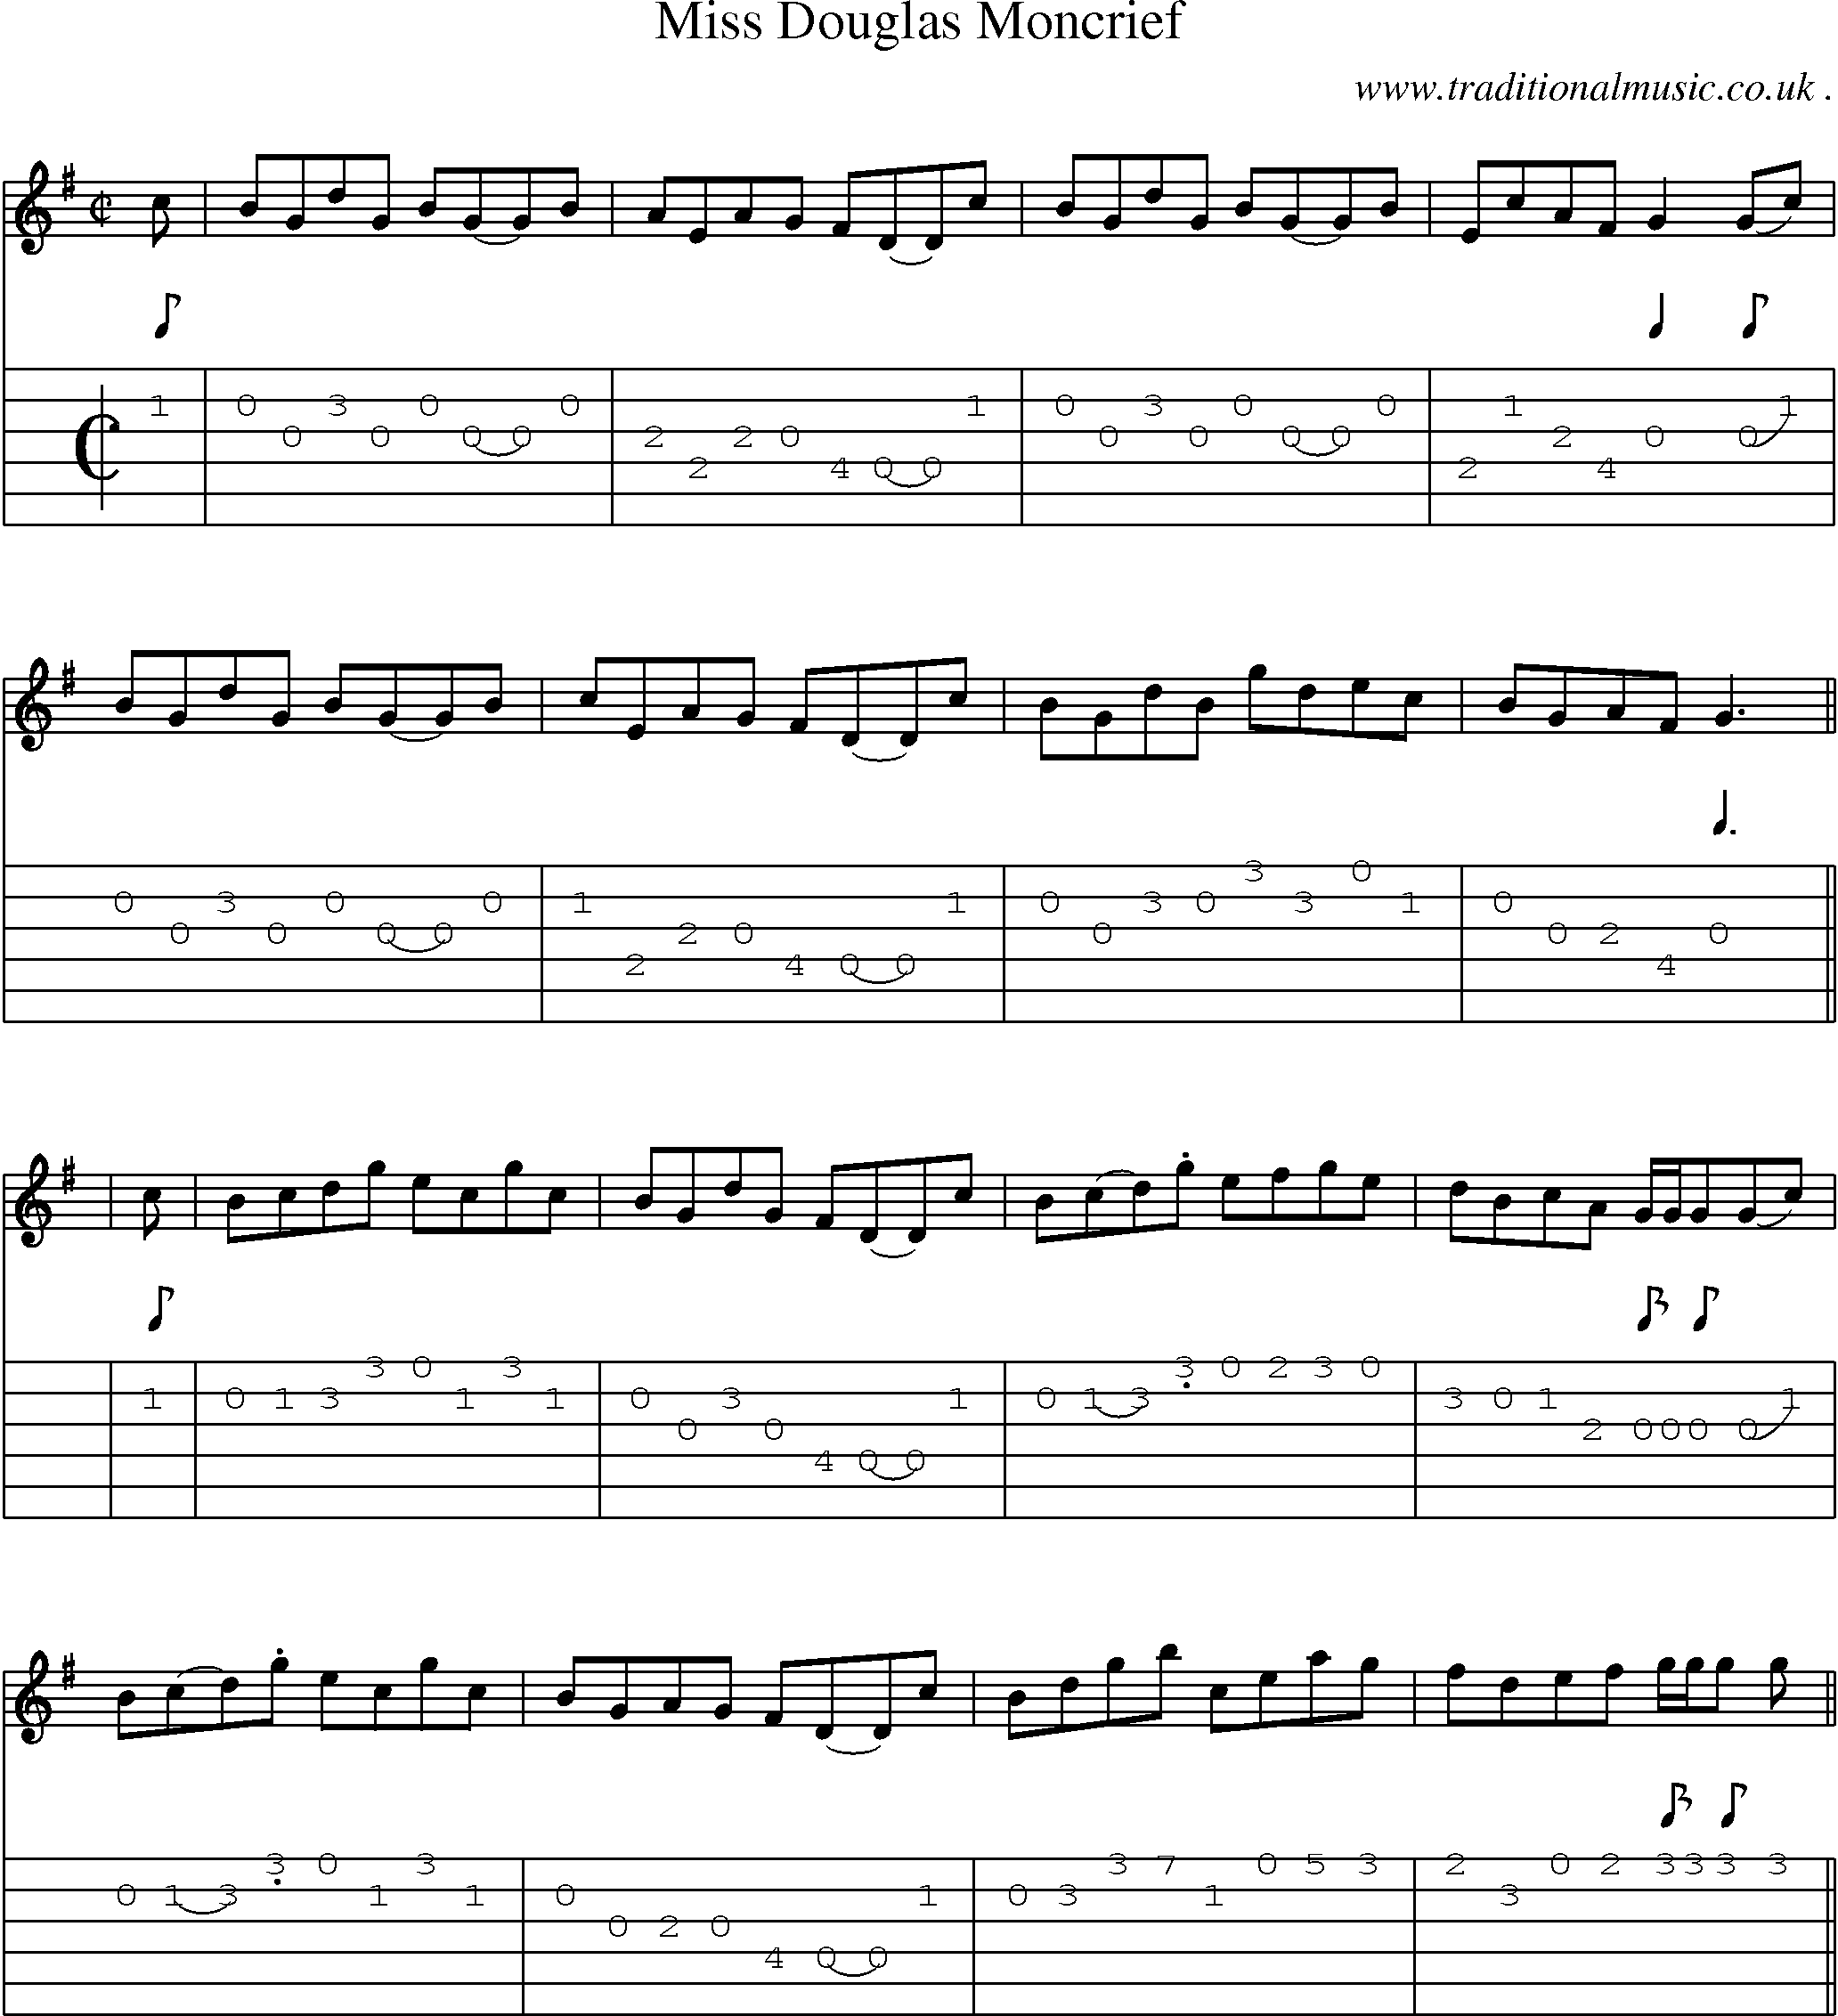 Sheet-Music and Guitar Tabs for Miss Douglas Moncrief